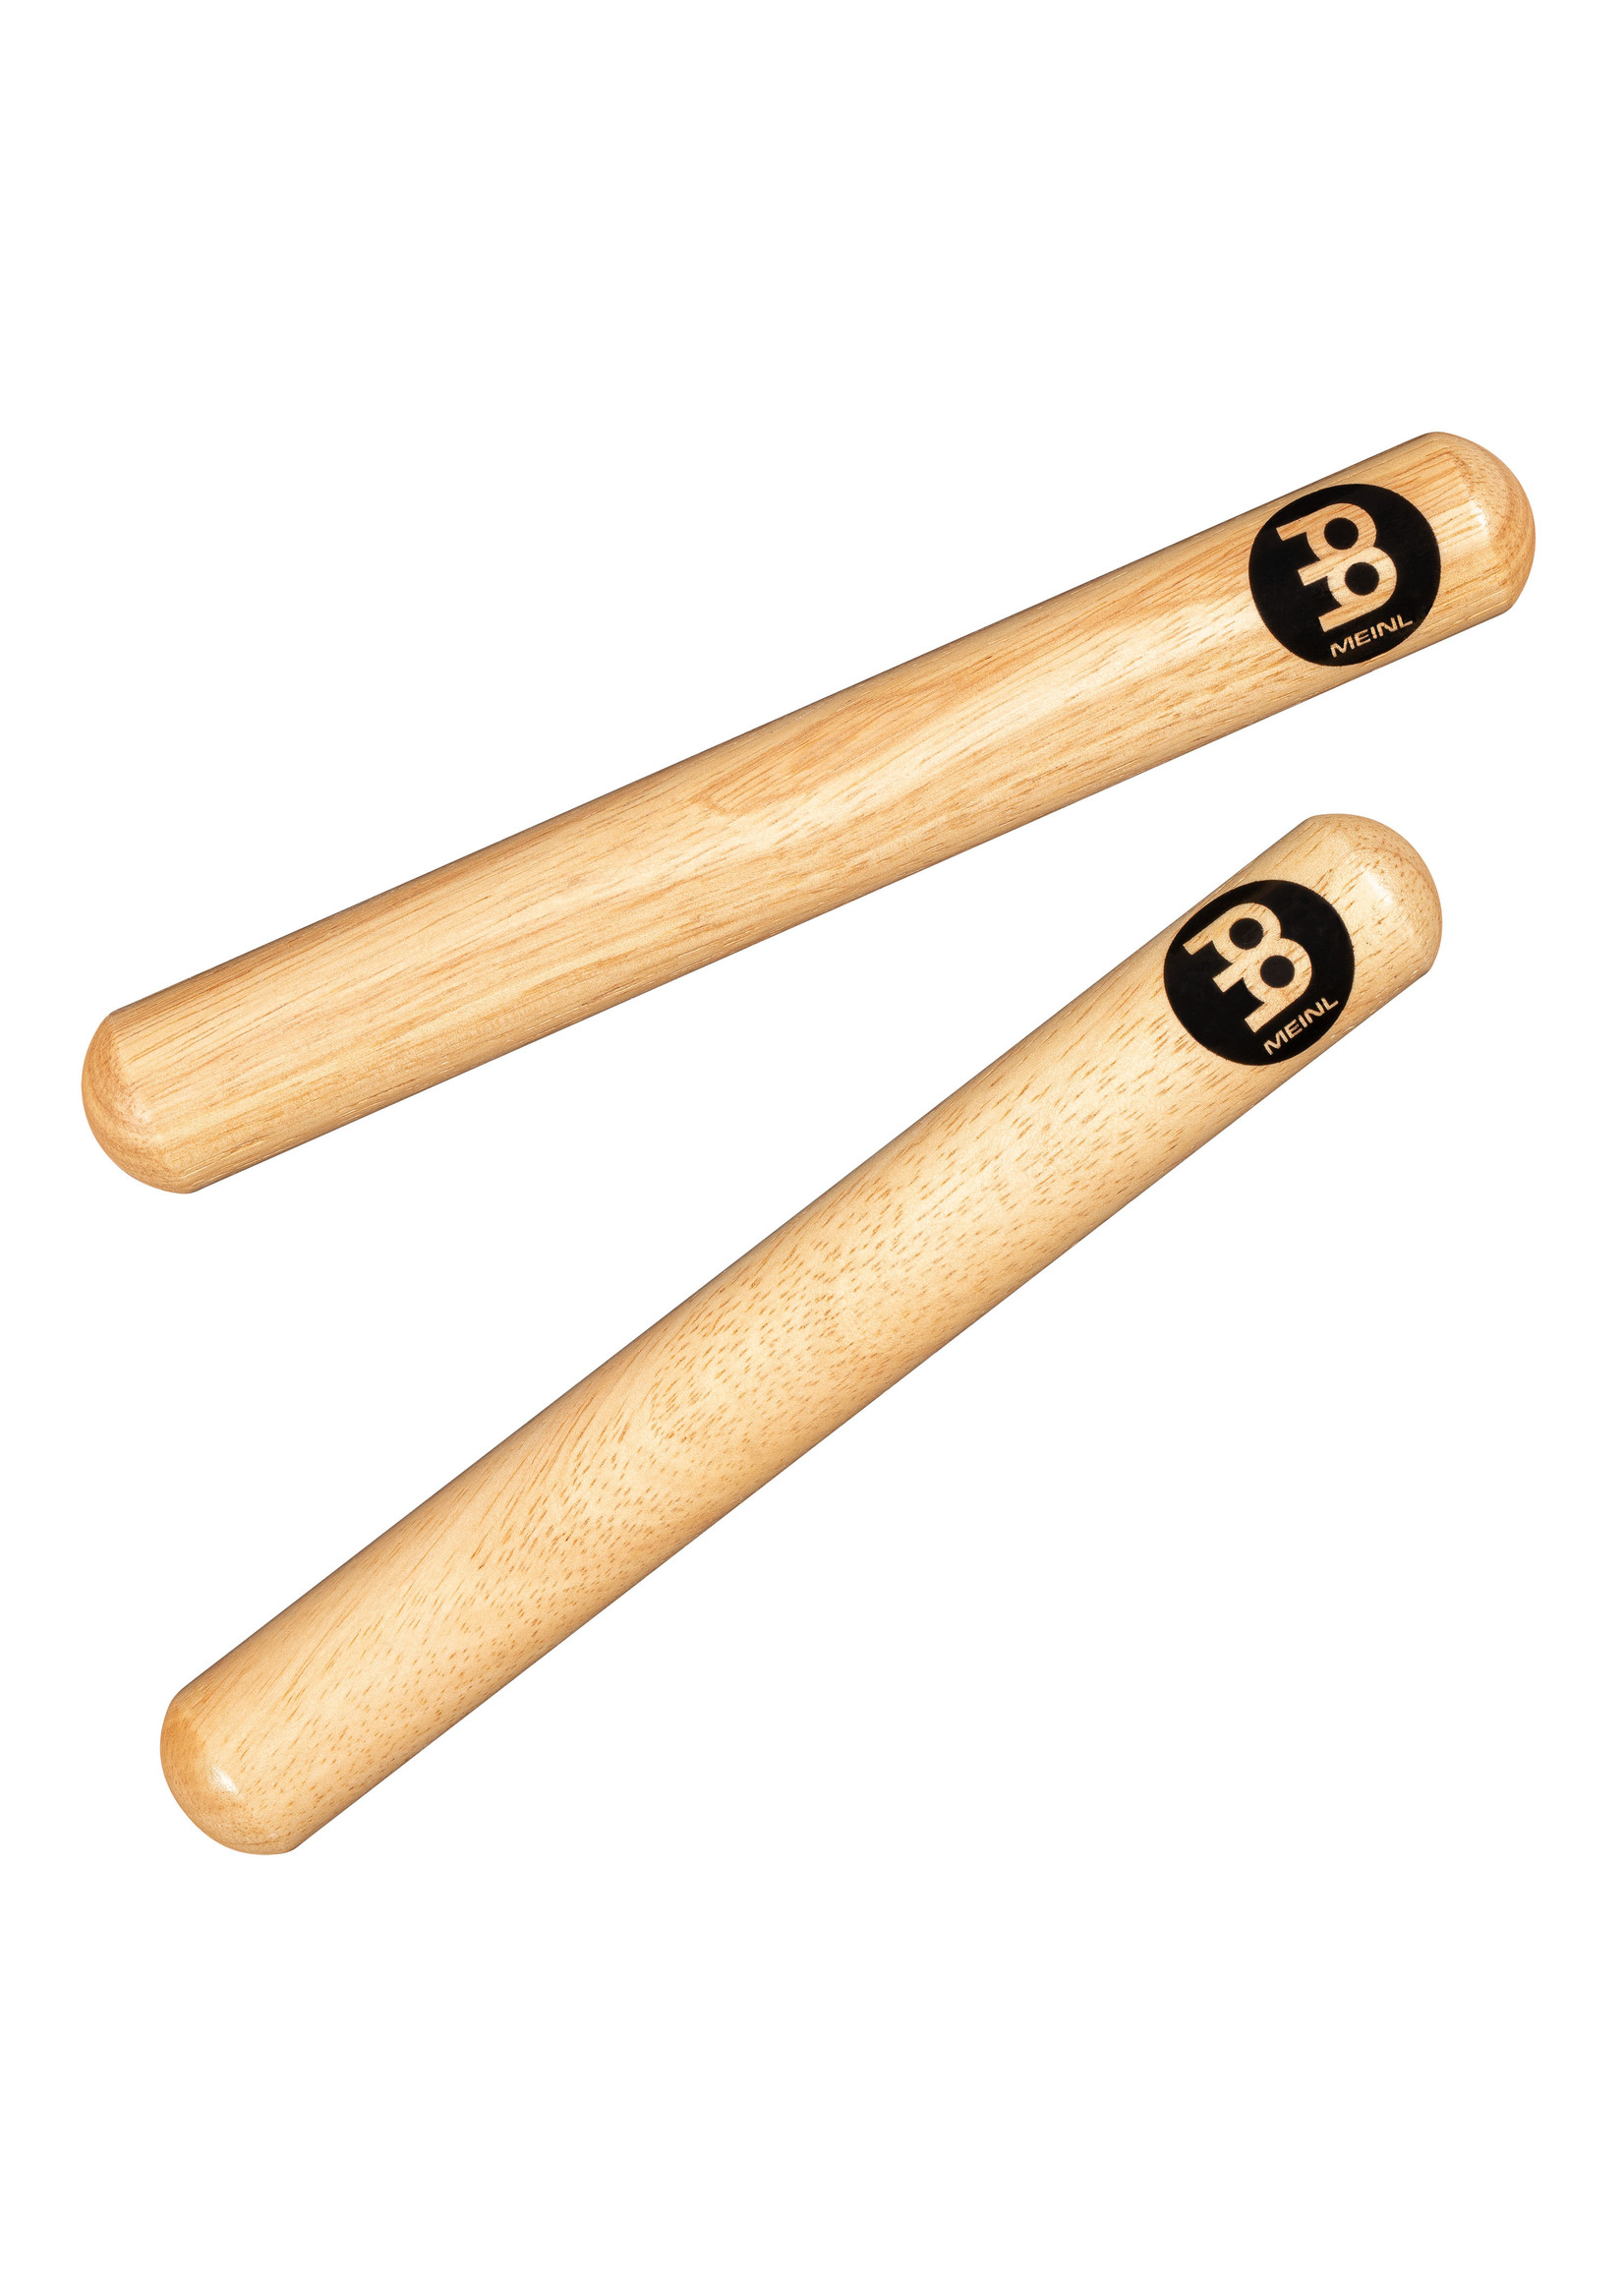 MEINL Meinl Percussion Wood Clave, Classic, Hardwood